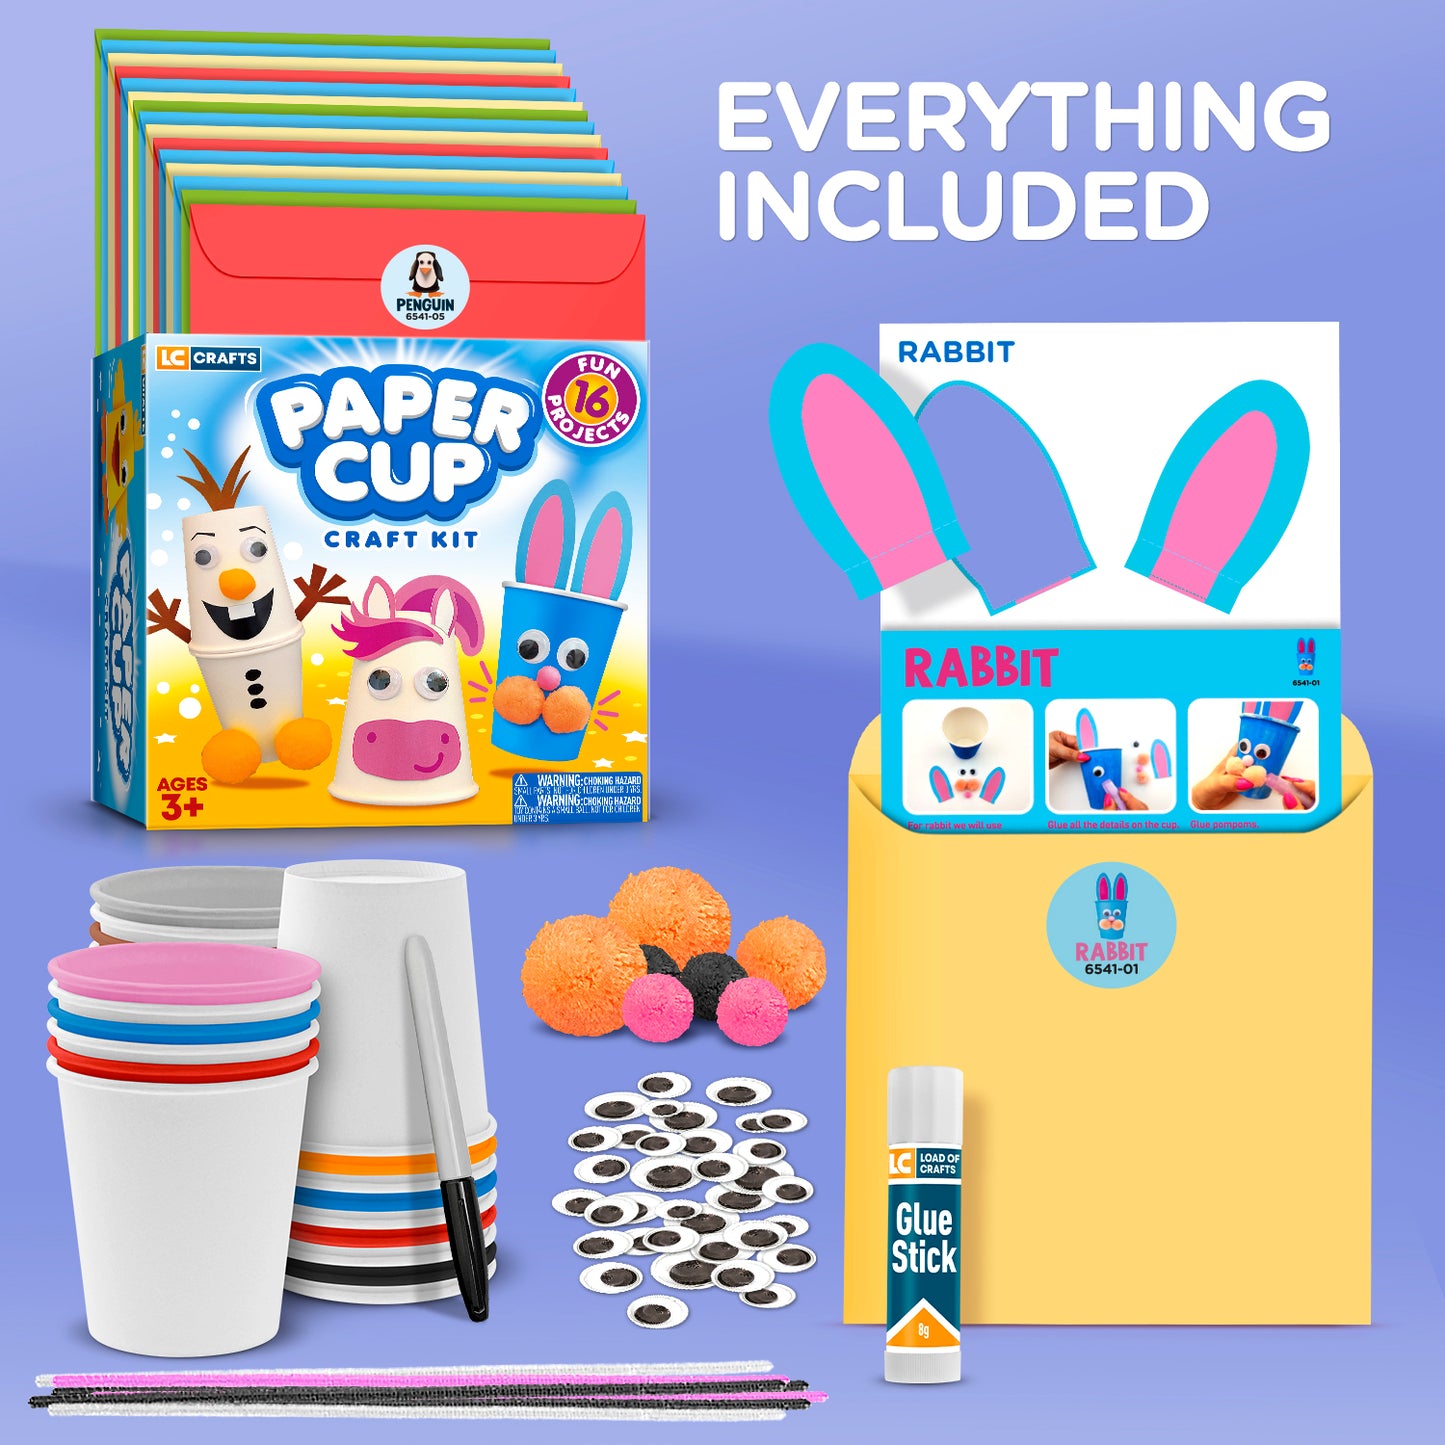 Arts and Crafts for Toddlers, Create Your Own Animal Crafts Using Cups, Kit Includes Supplies, and Instructions, Best Craft Set for Kids Ages 2-5